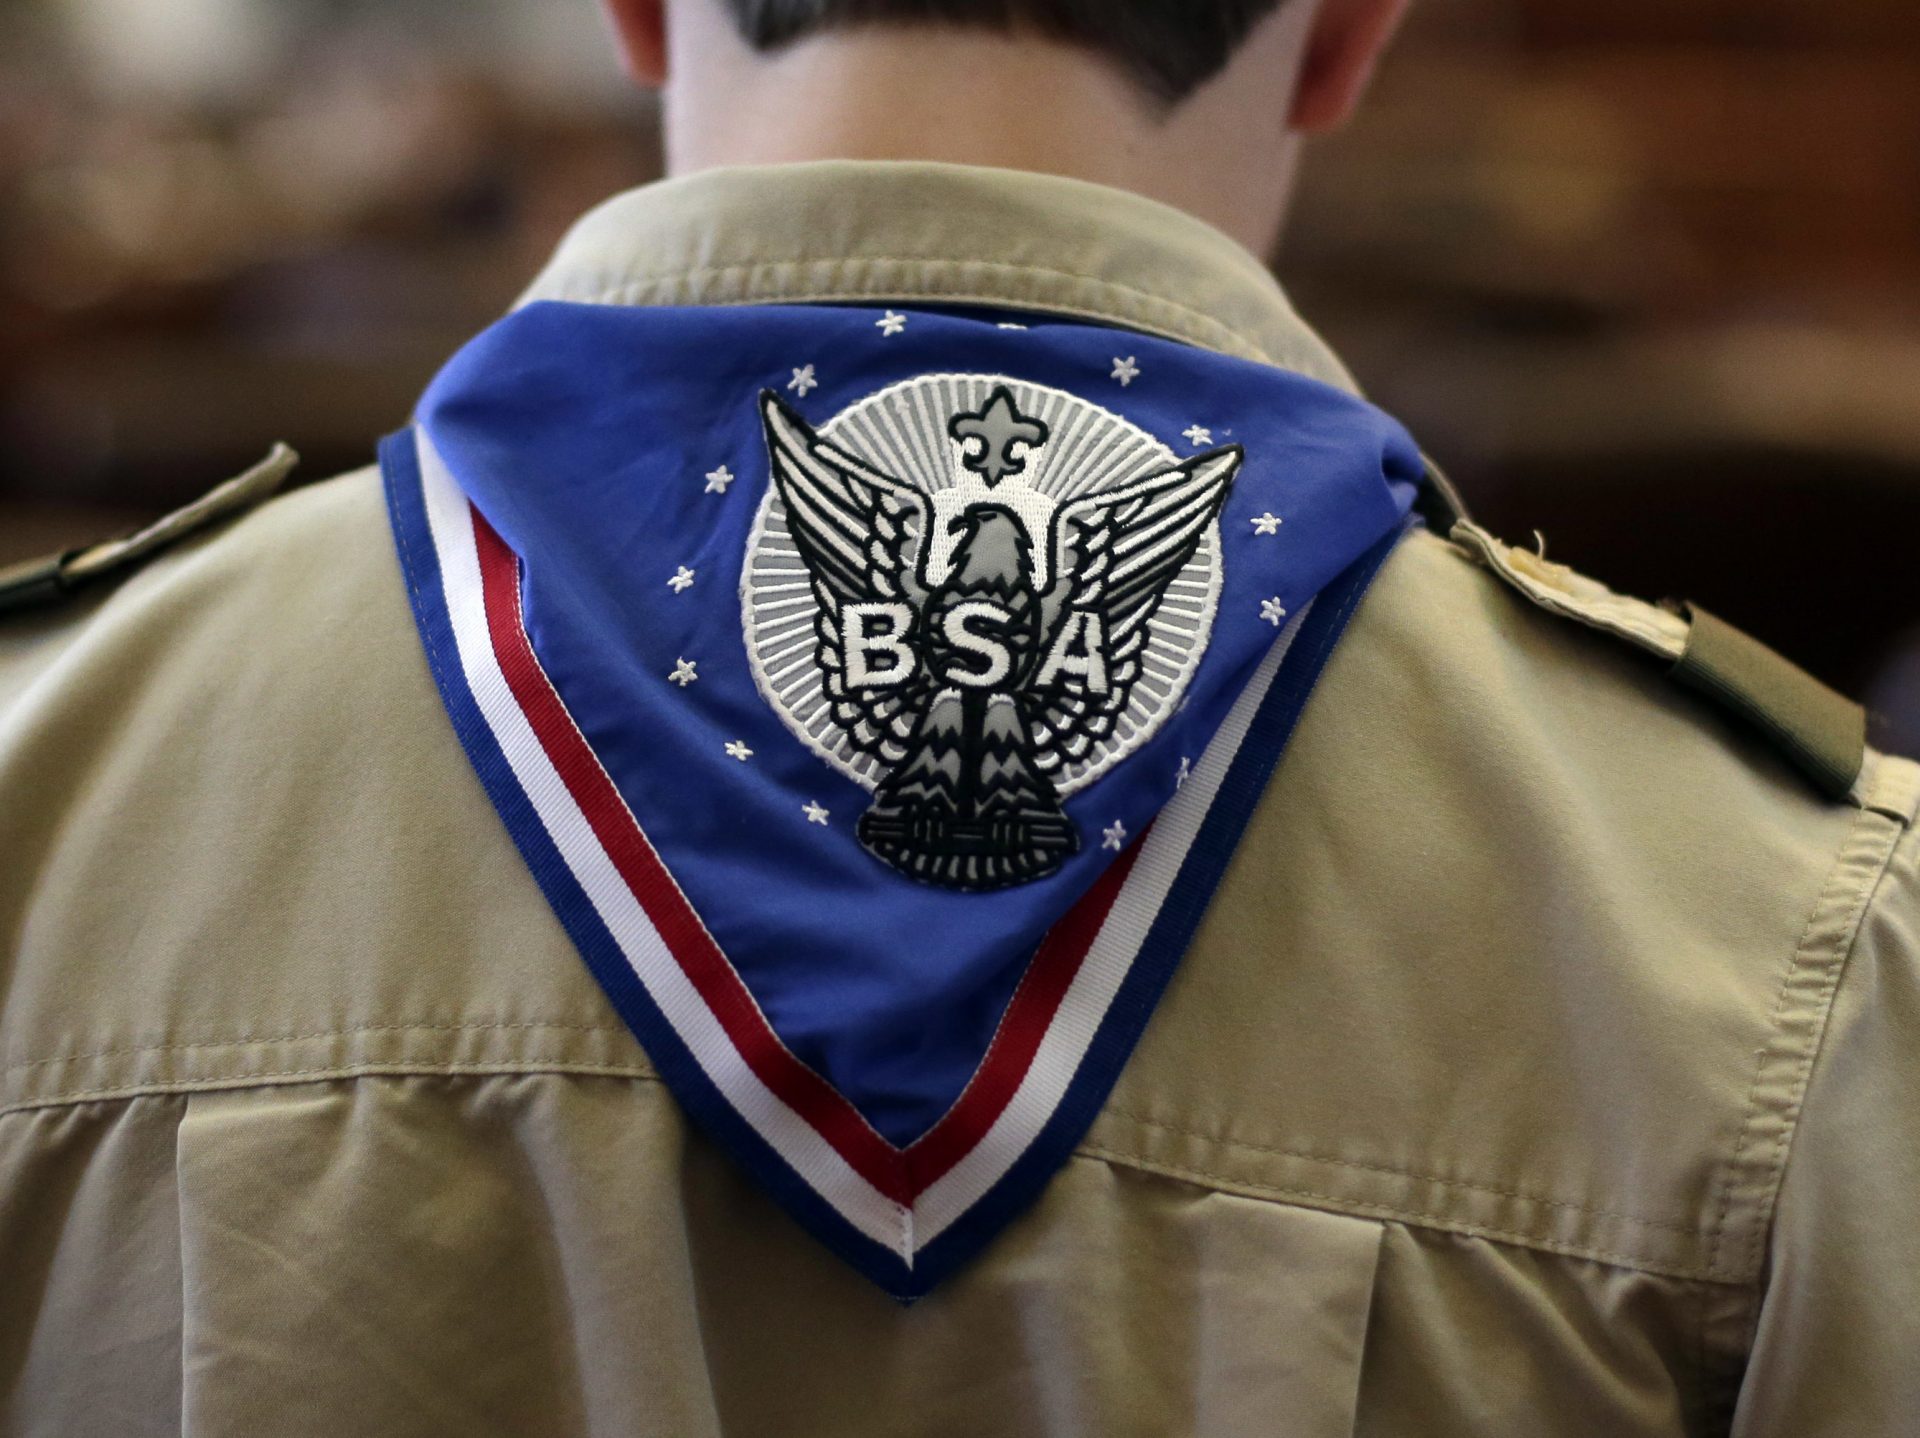 A Boy Scout wears an Eagle Scot neckerchief during the annual Boy Scouts Parade and Report to State in the House Chambers at the Texas State Capitol, February 2013, in Austin, Texas.